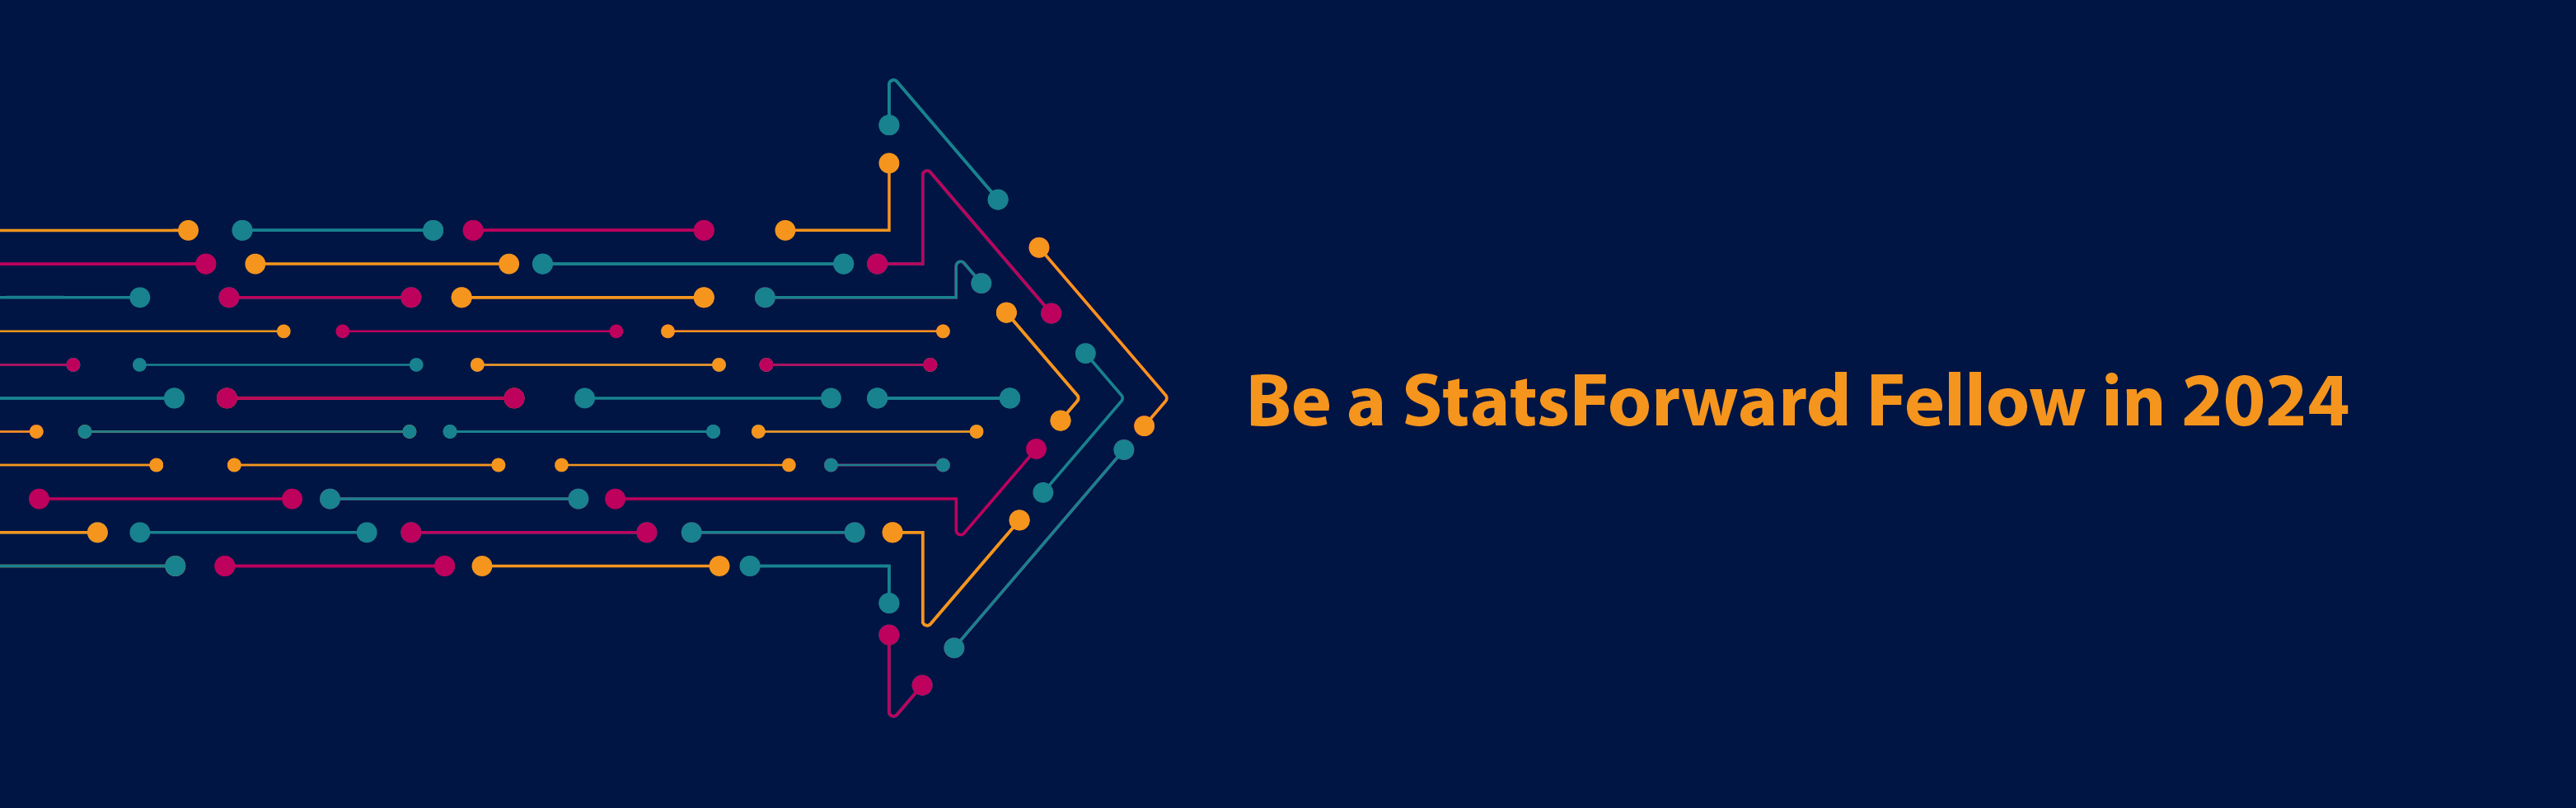 In celebration of Black History Month, we recognize 10 individuals who have made tremendous contributions to the fields of statistics and data science.